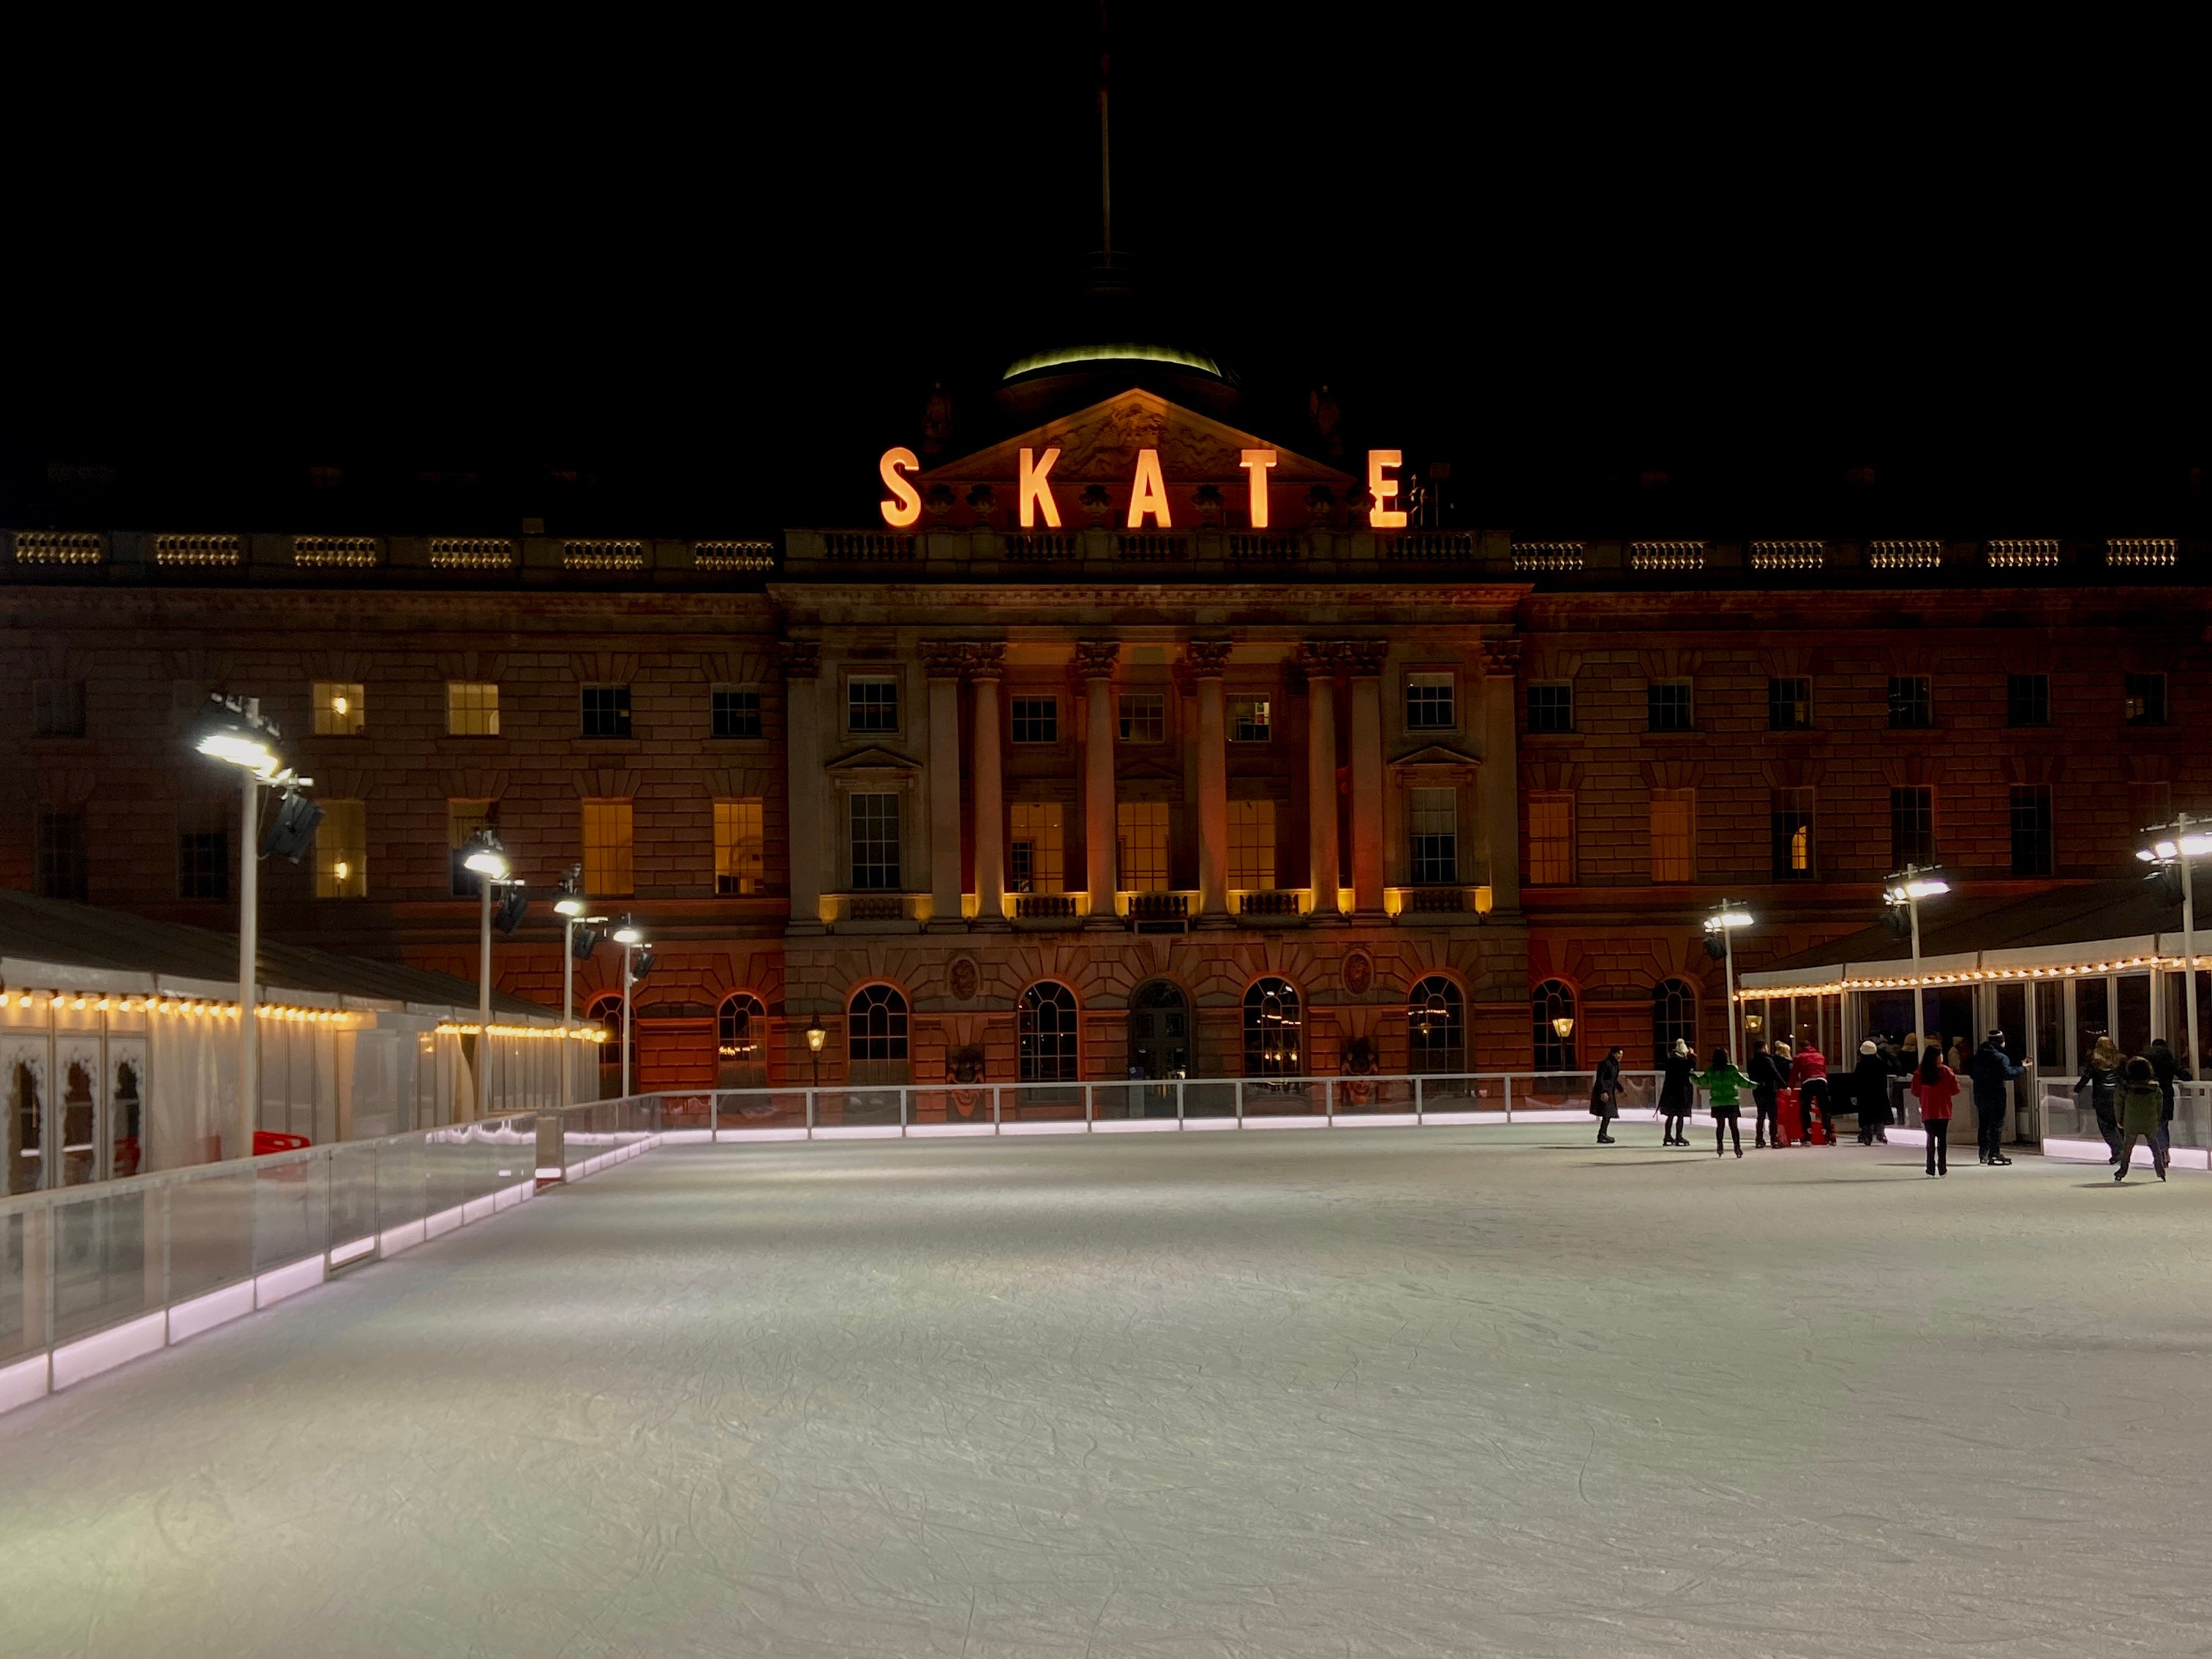 Skate Lates feature DJs, radio hosts and music producers